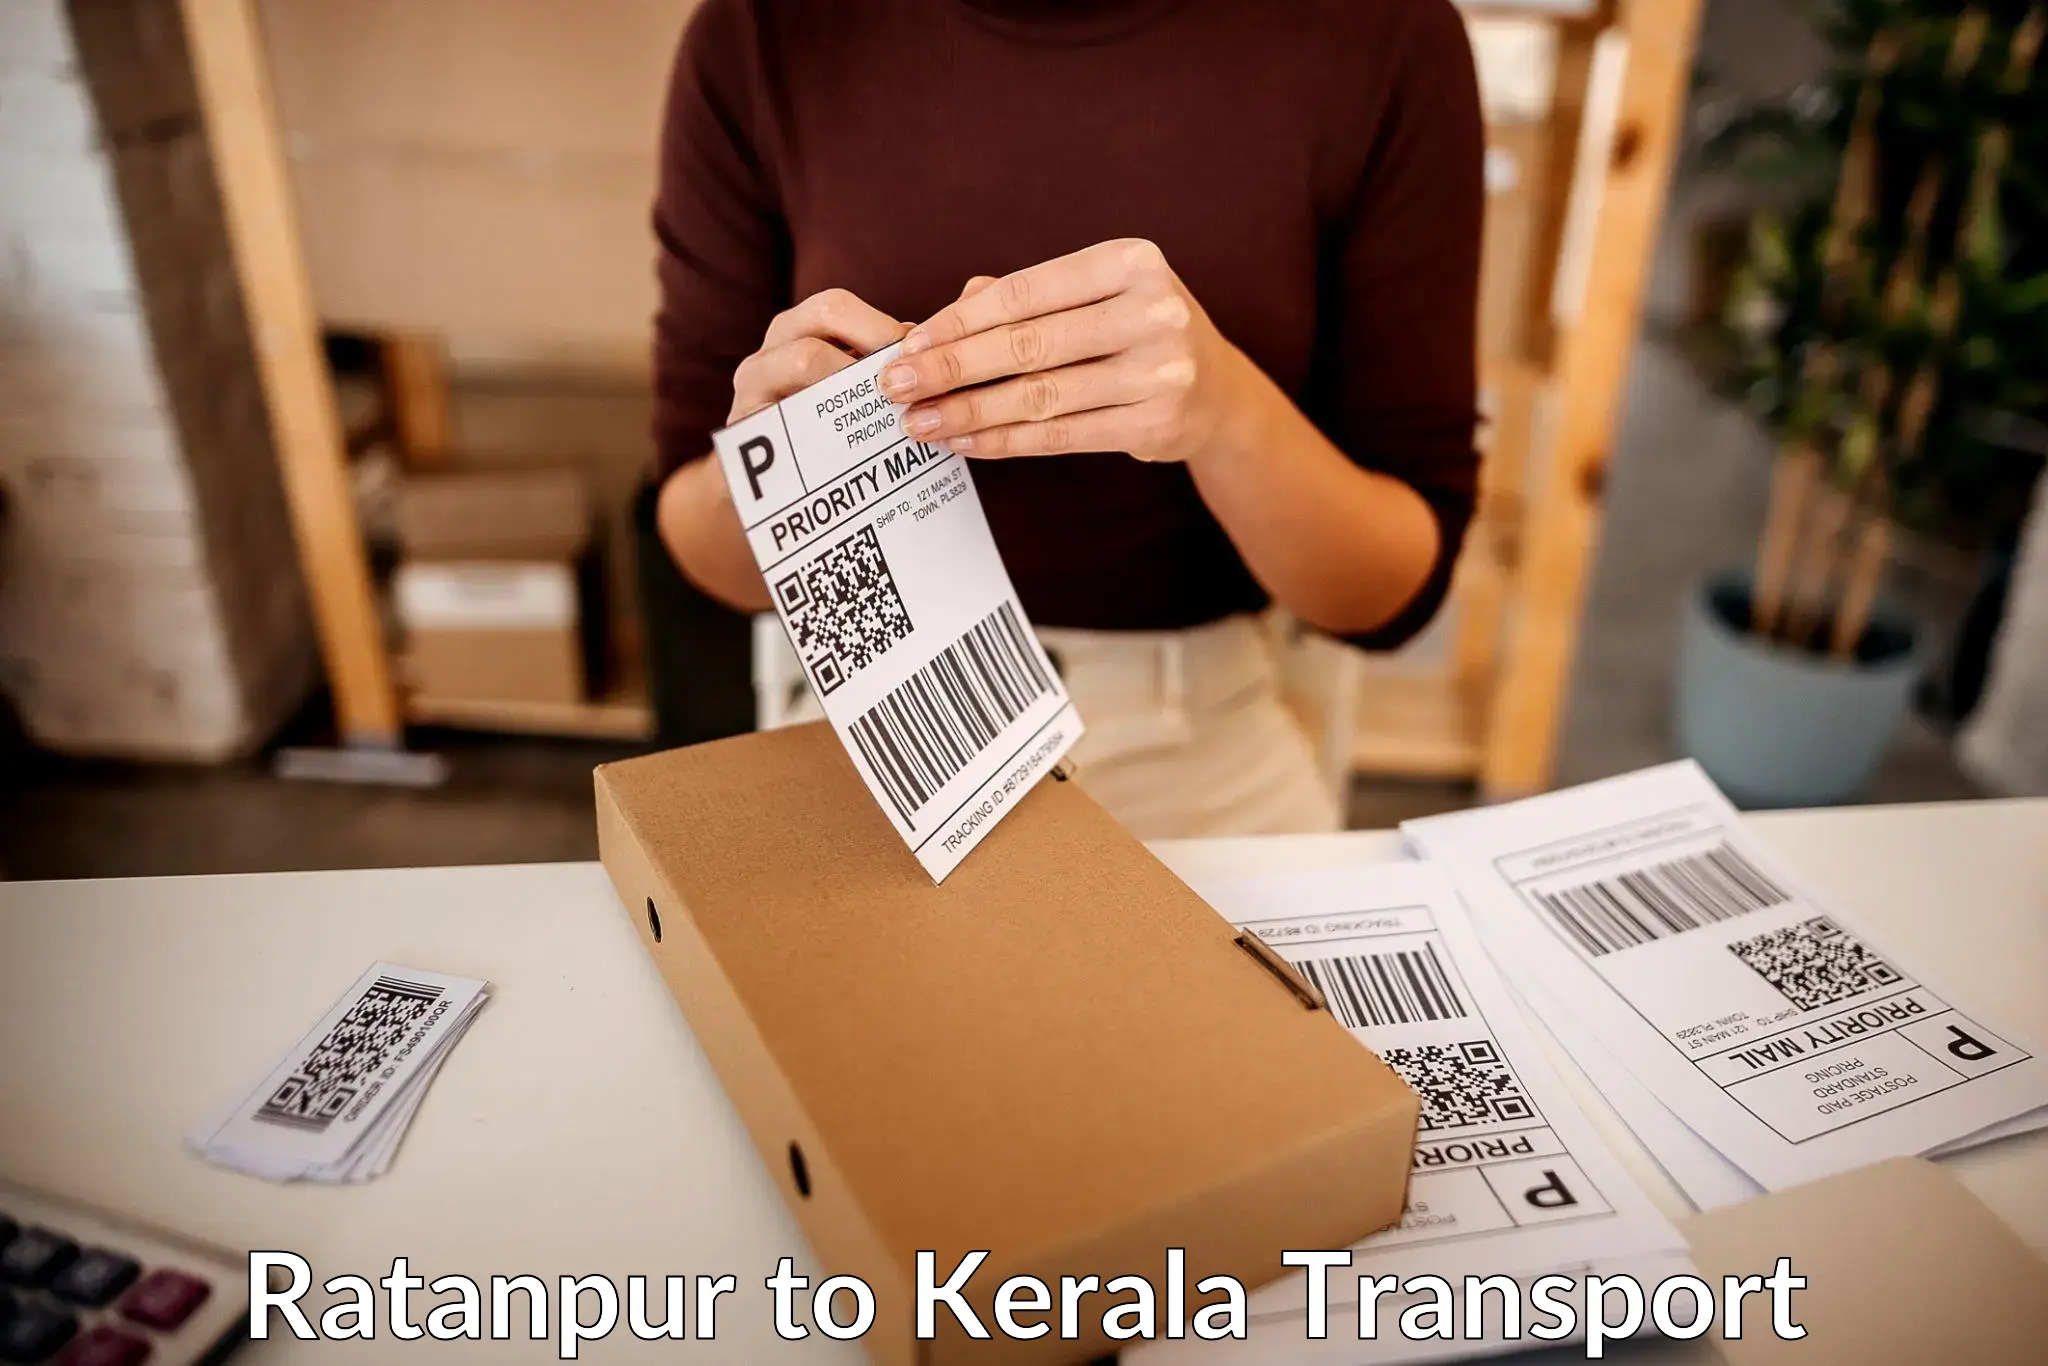 Domestic goods transportation services Ratanpur to Kollam